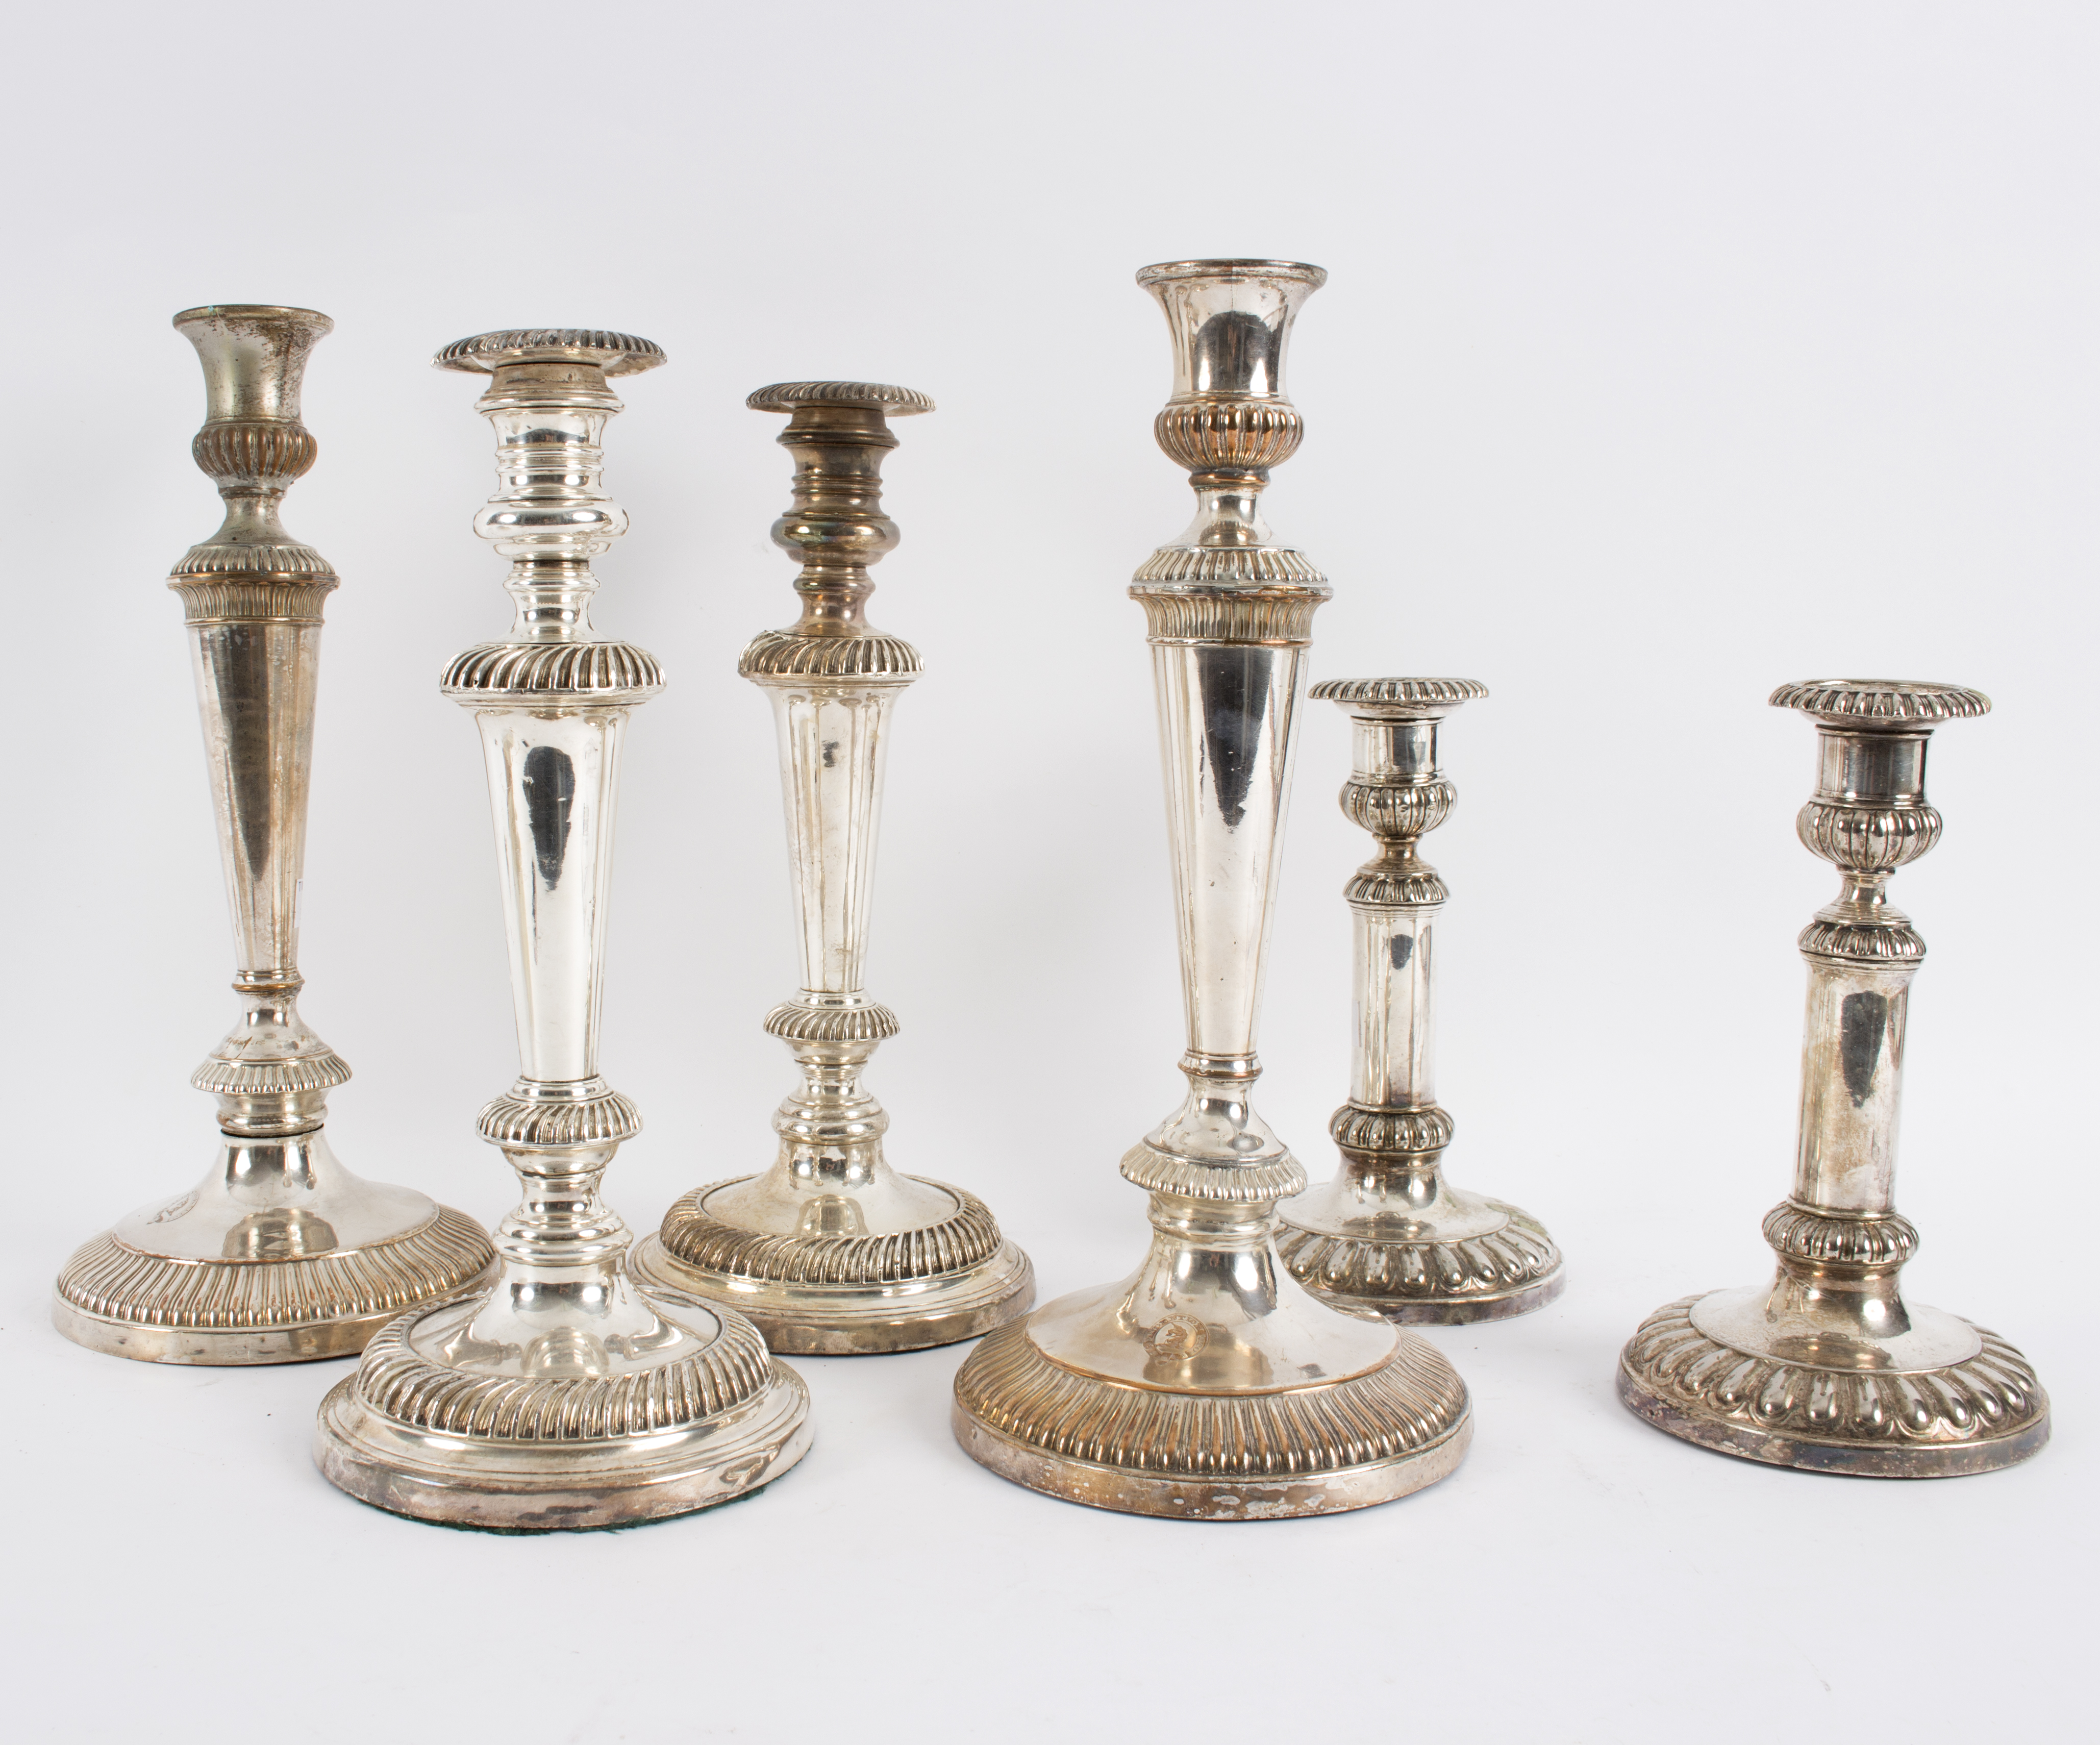 Three pairs of plated candlesticks